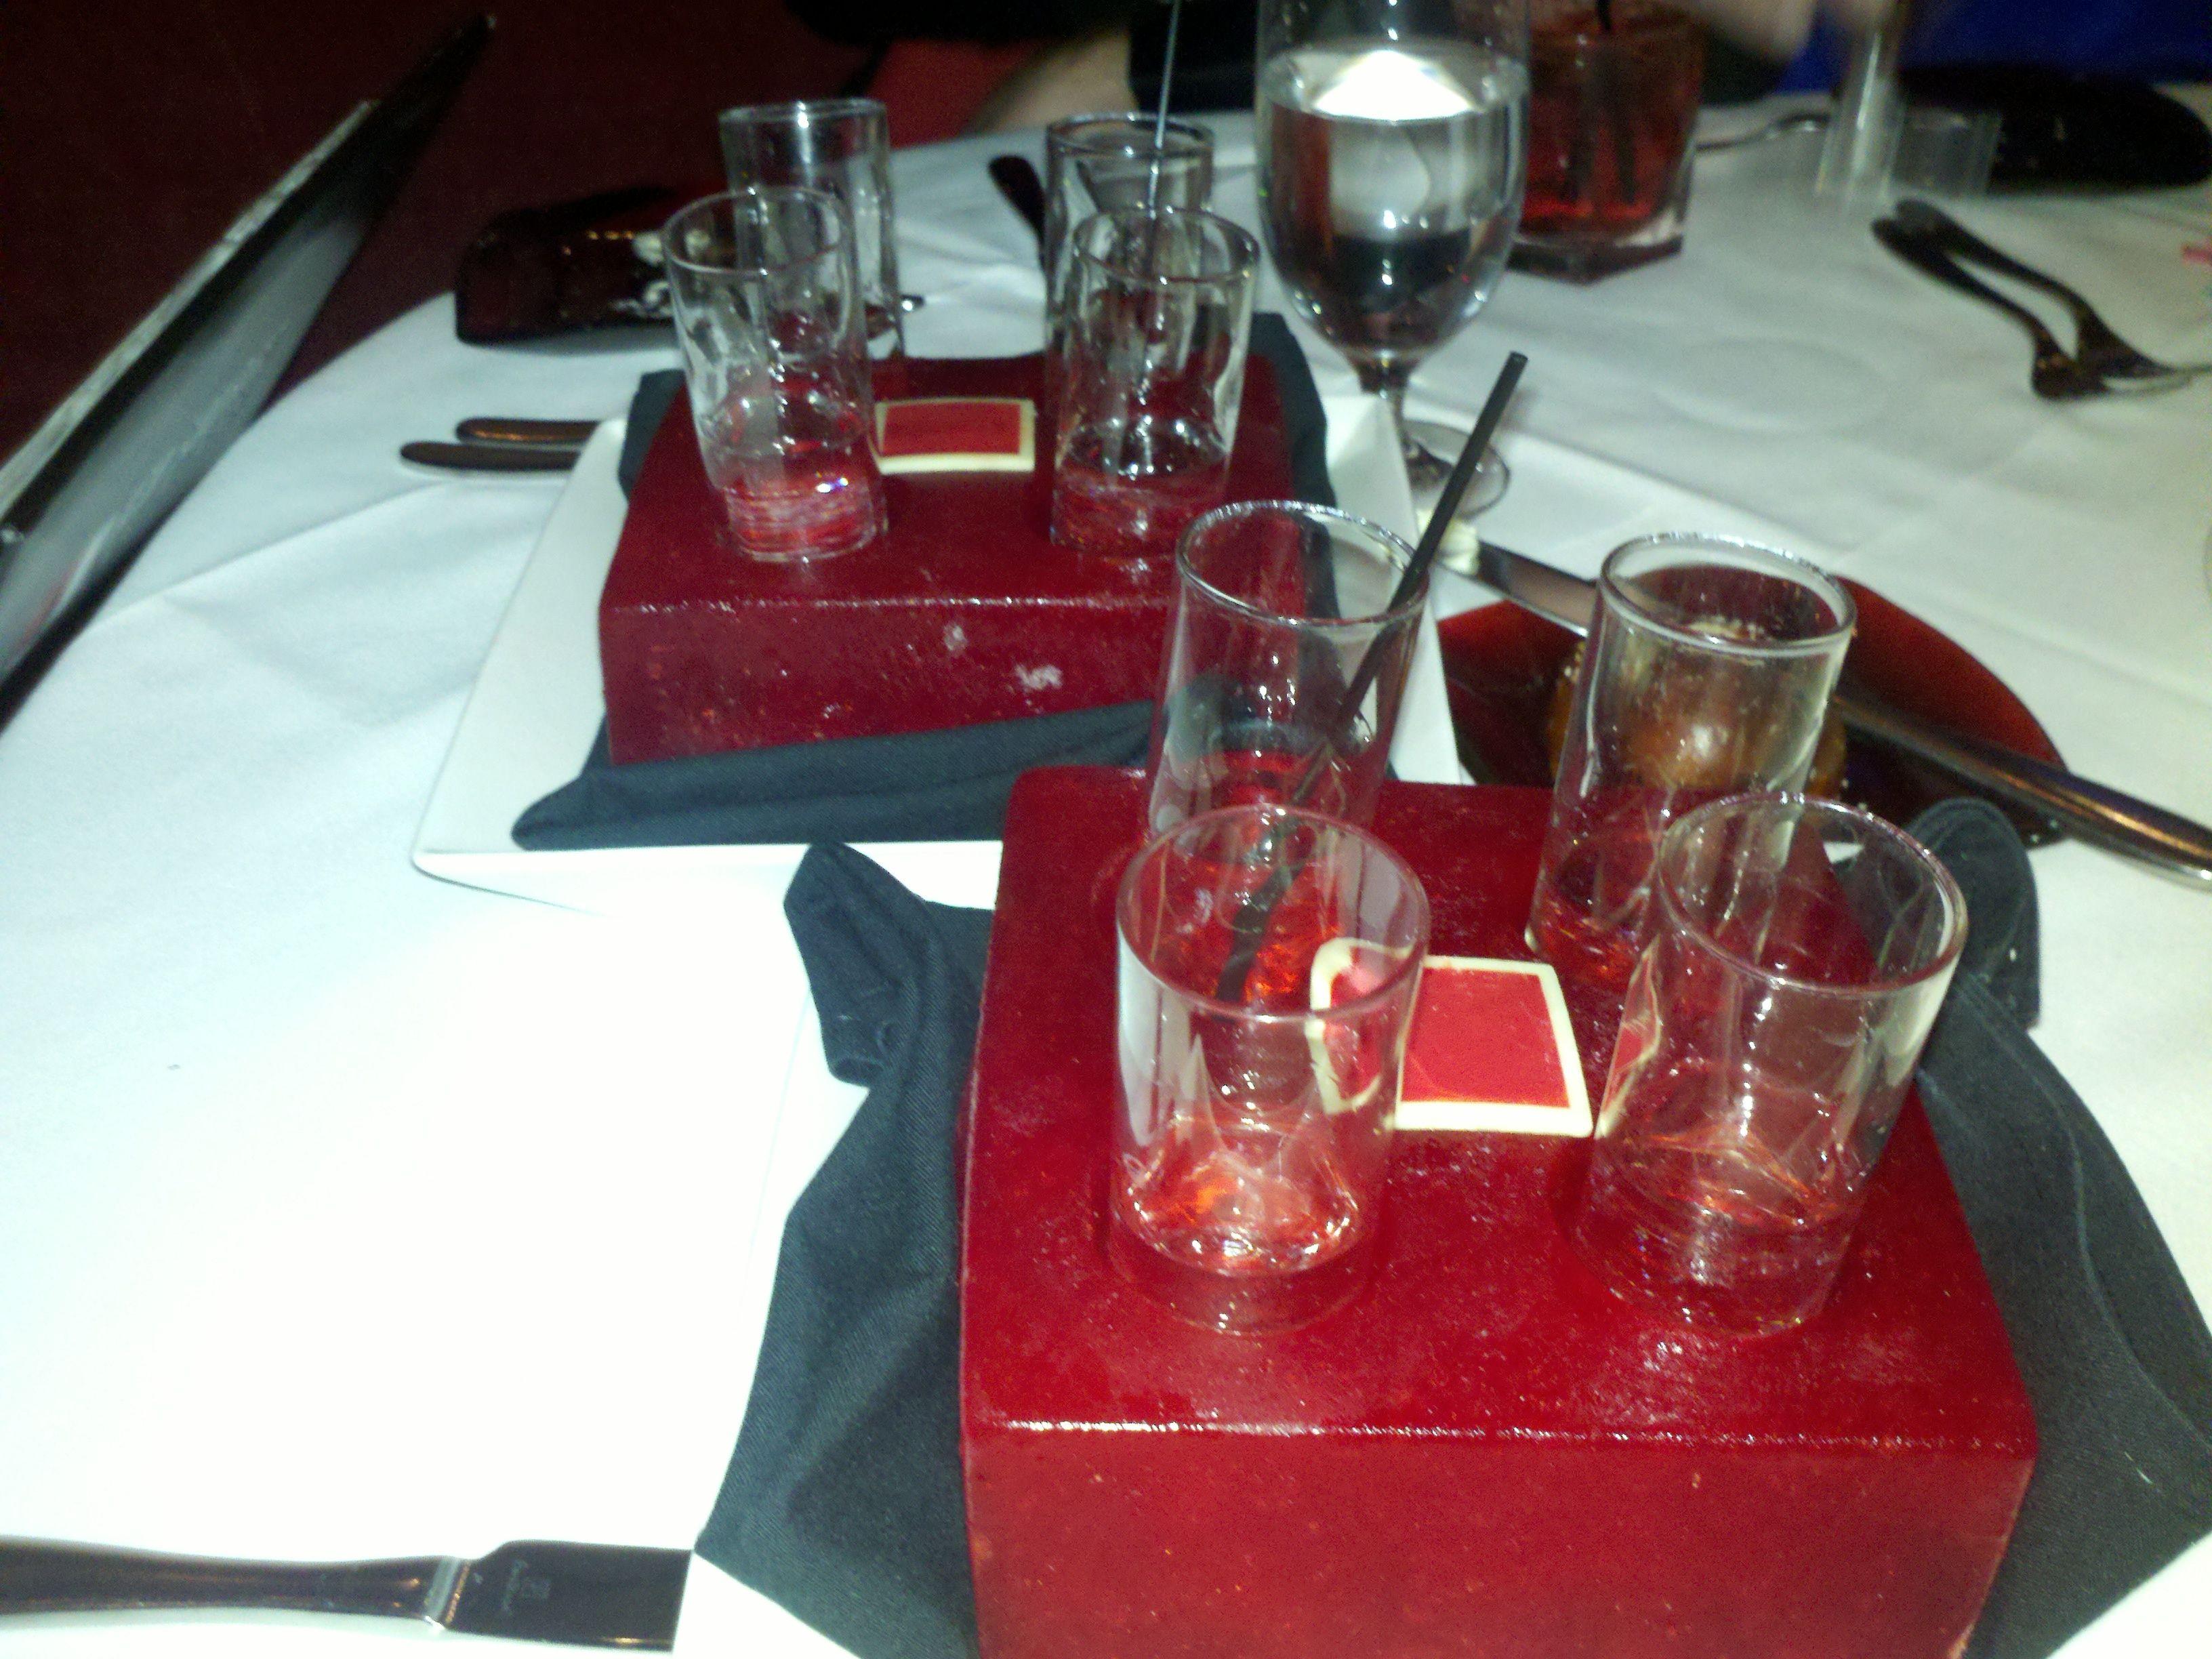 Red Square Las Vegas Logo - Nostrovia! Vodka flights at Red Square. All is Yar